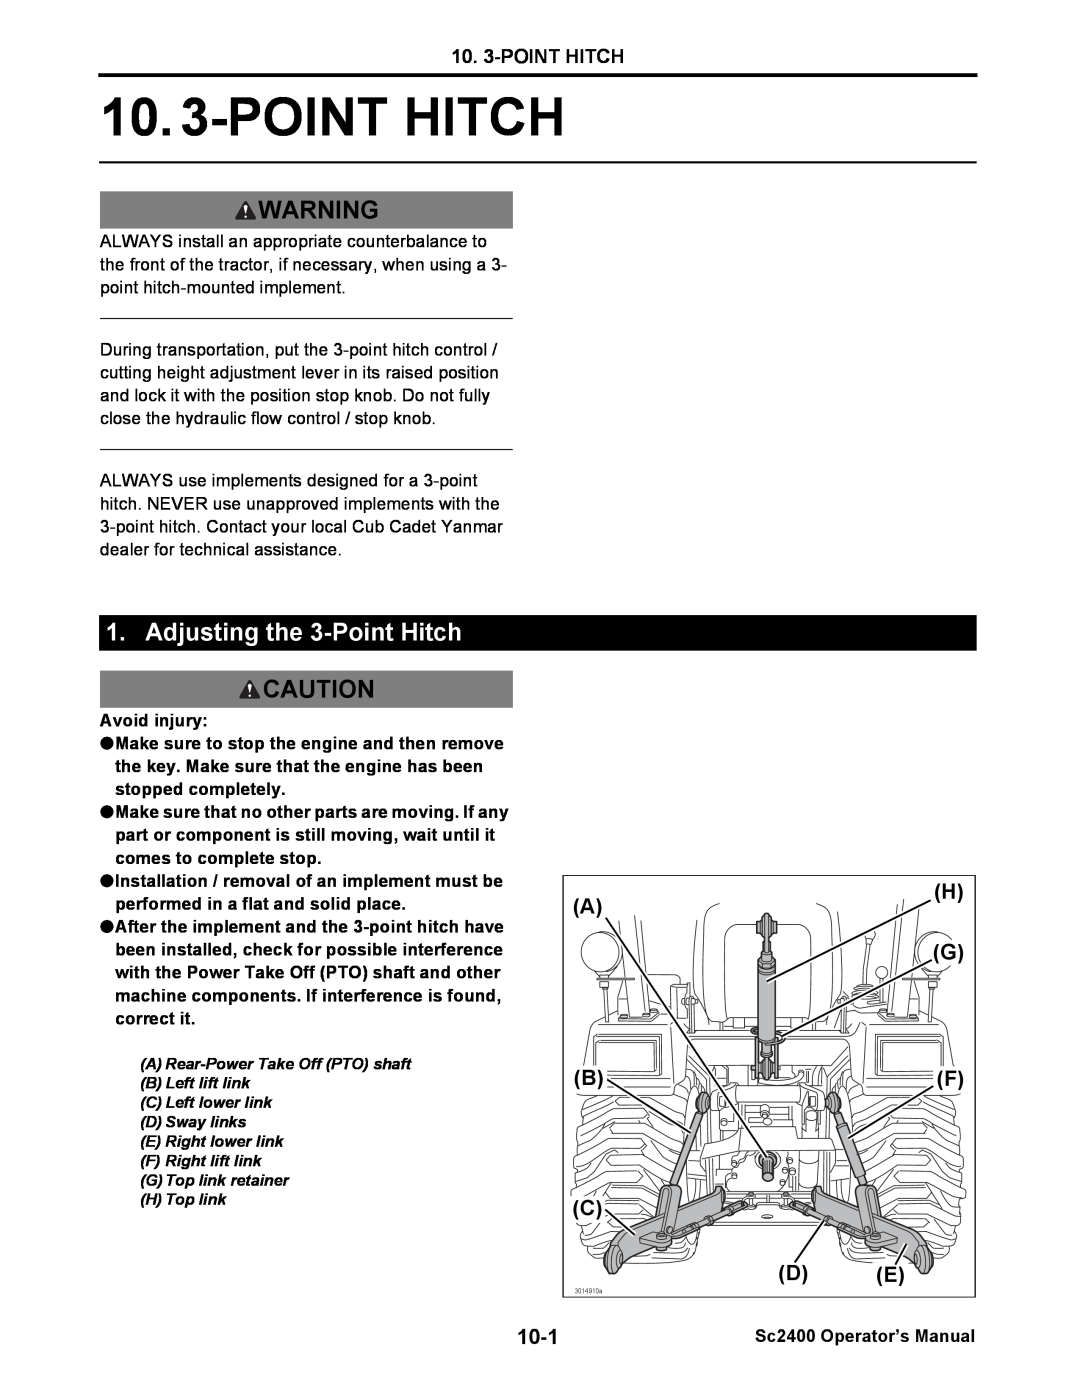 Cub Cadet SC2400 manual 10. 3-POINTHITCH, Adjusting the 3-PointHitch, Avoid injury, Sc2400 Operator’s Manual 